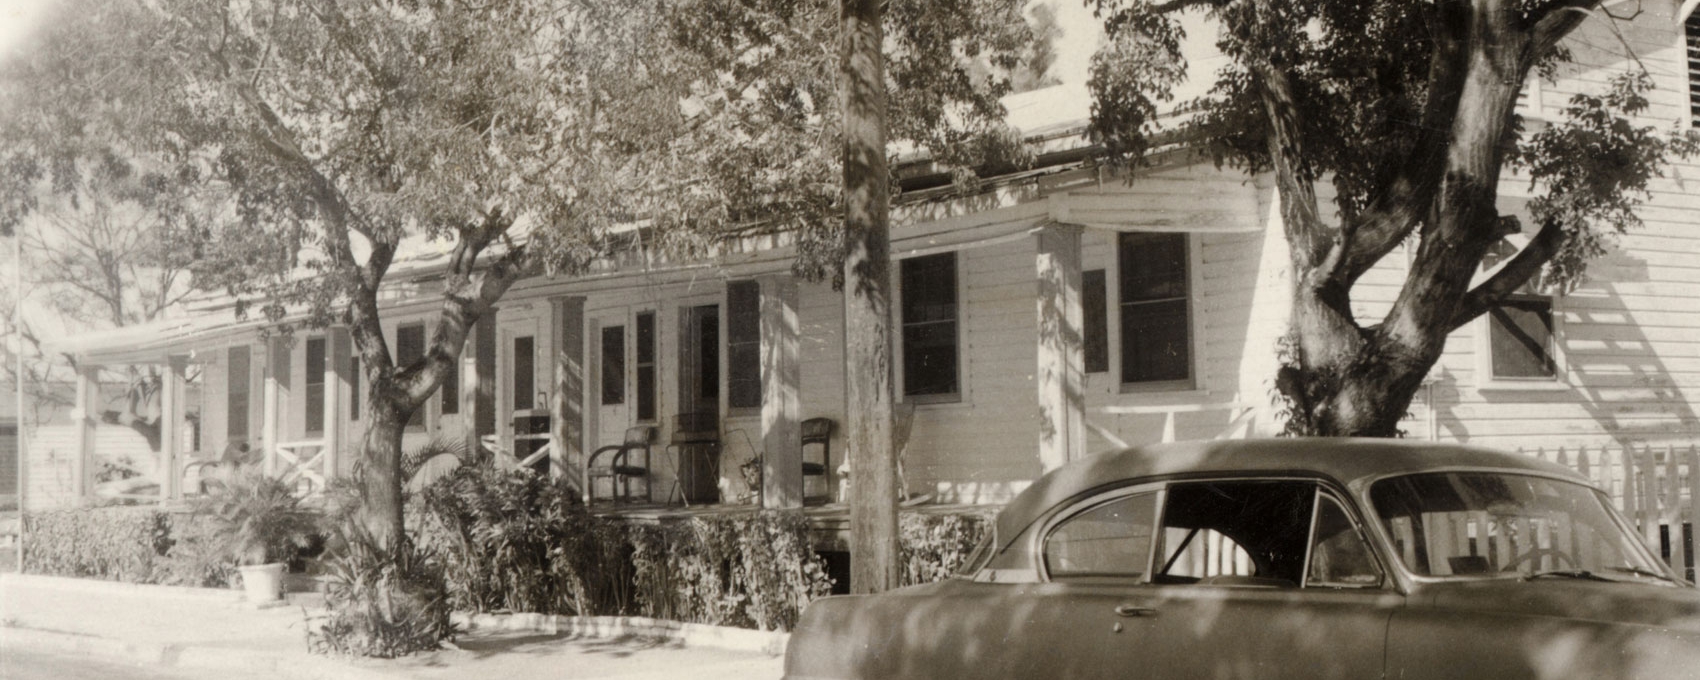 A historic photo of the Merlin Hotel with an antique car parked out front.